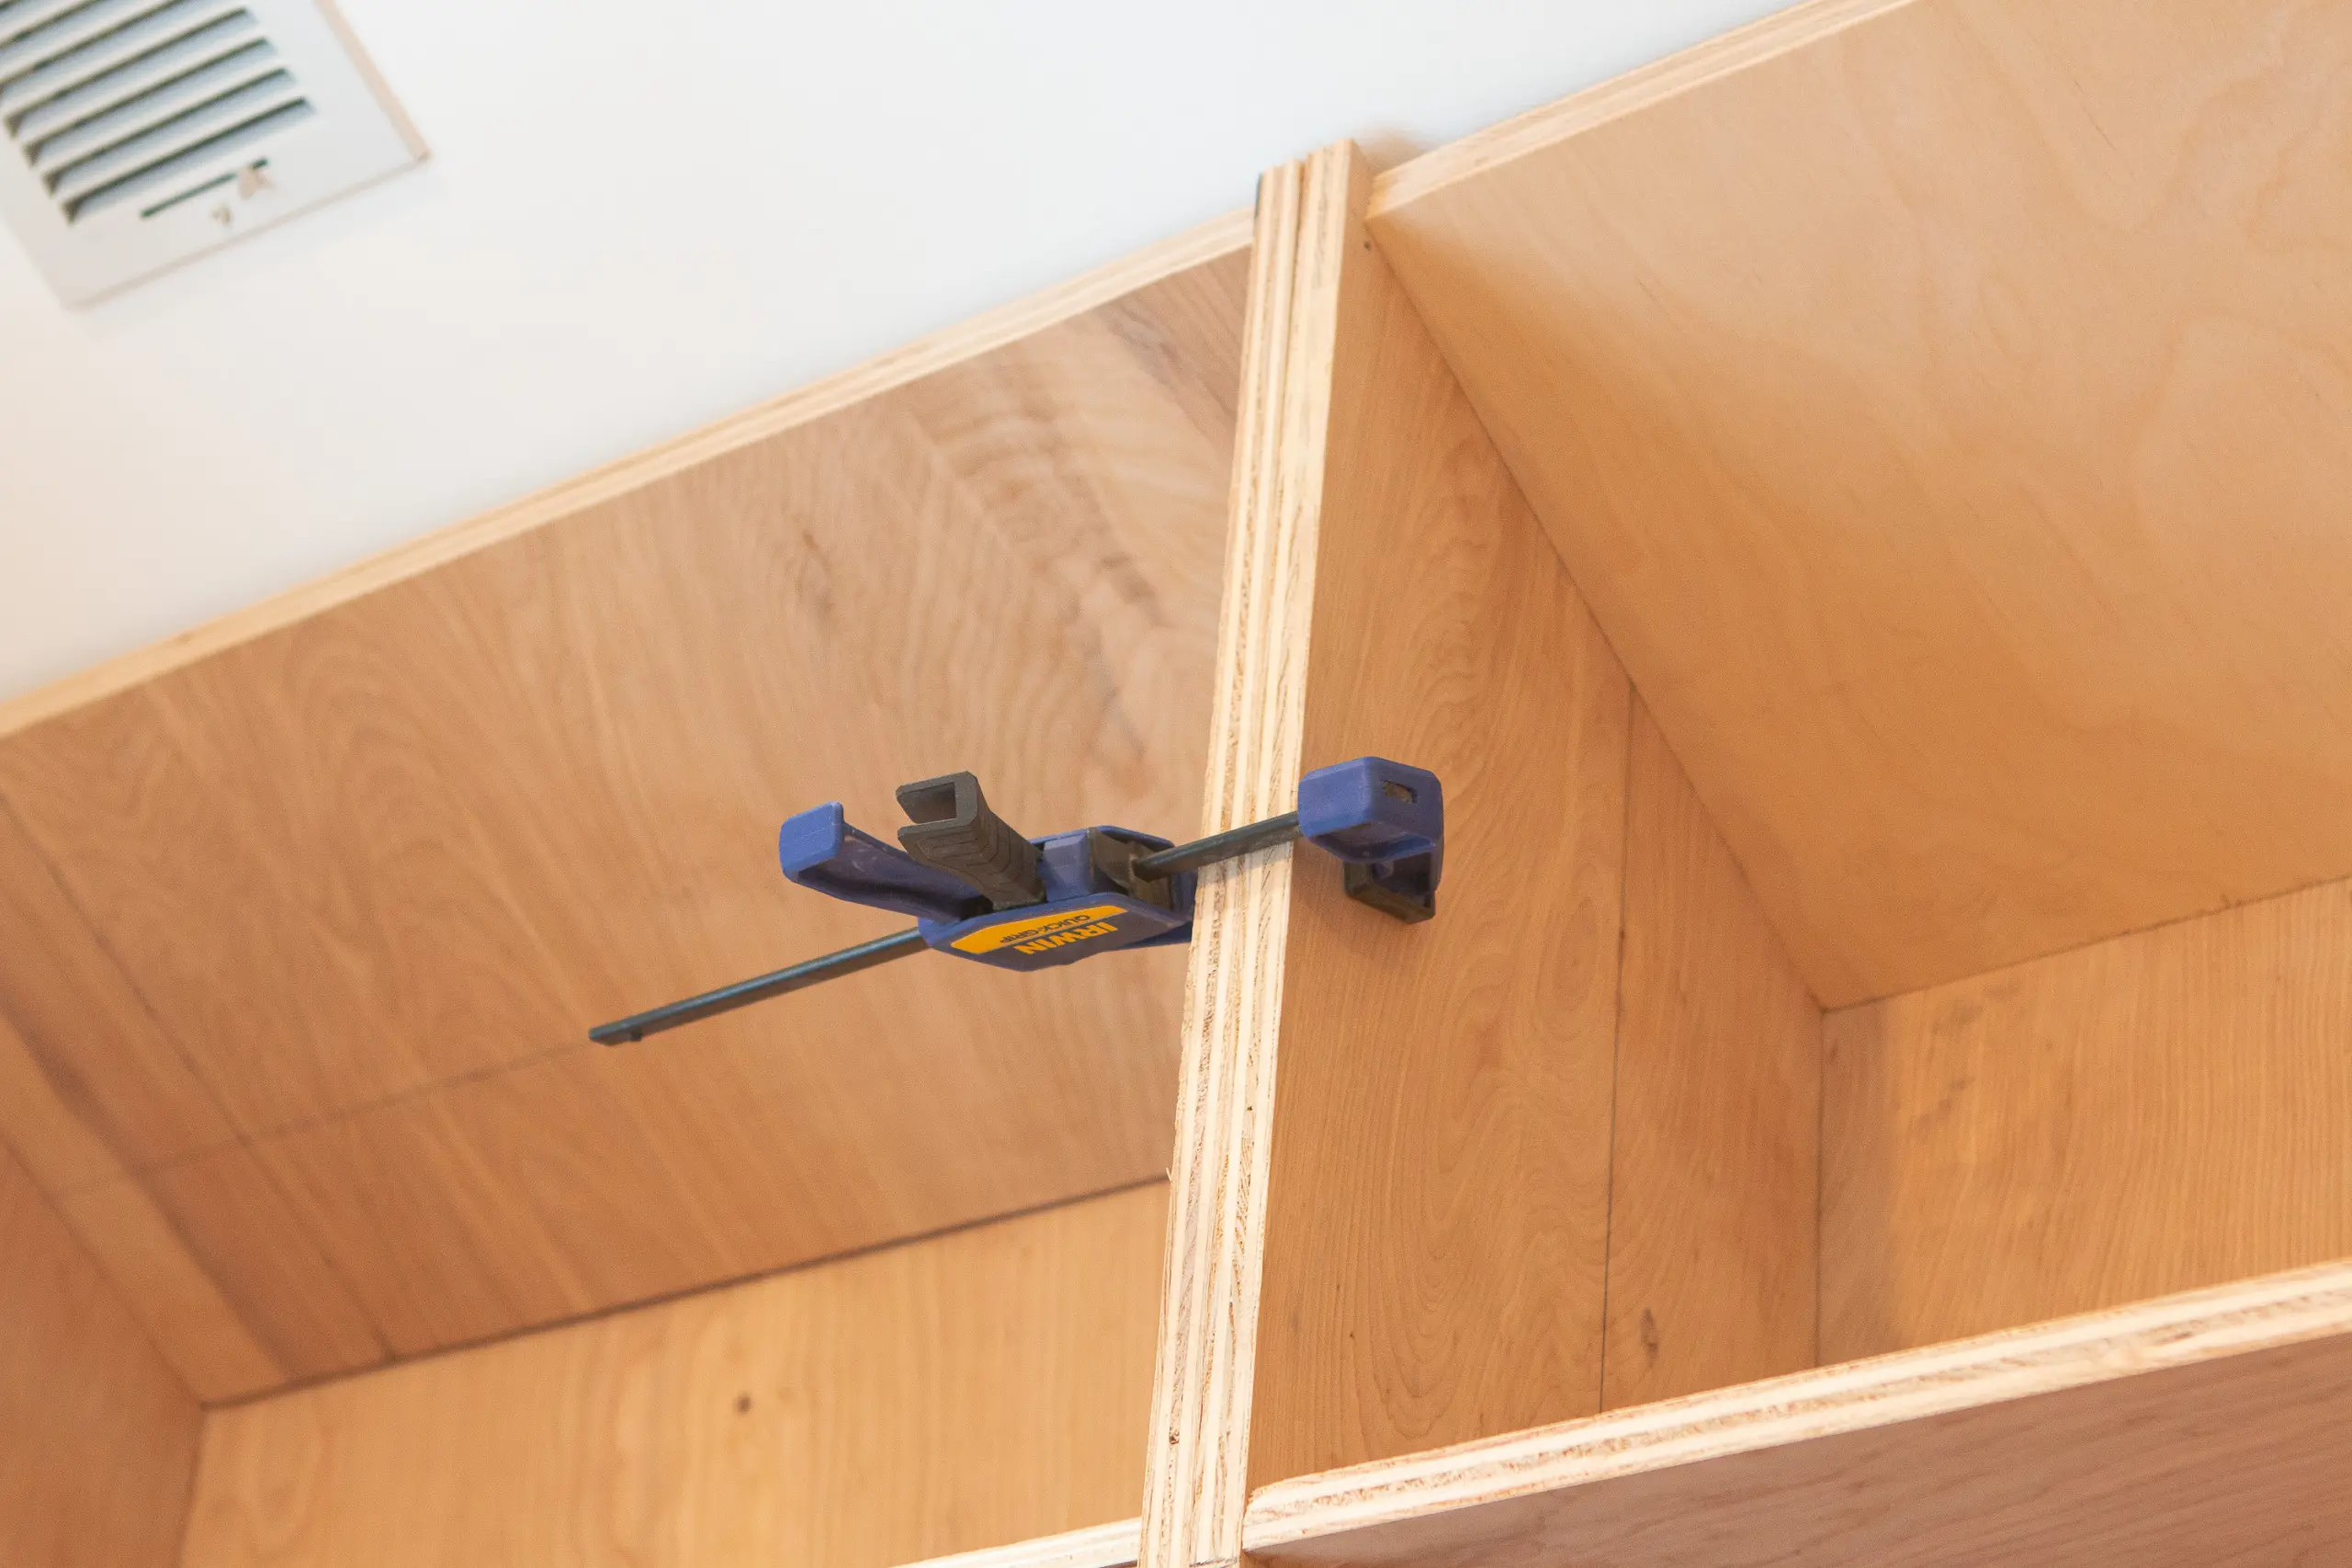 Using clamps to clamp DIY bookshelves together